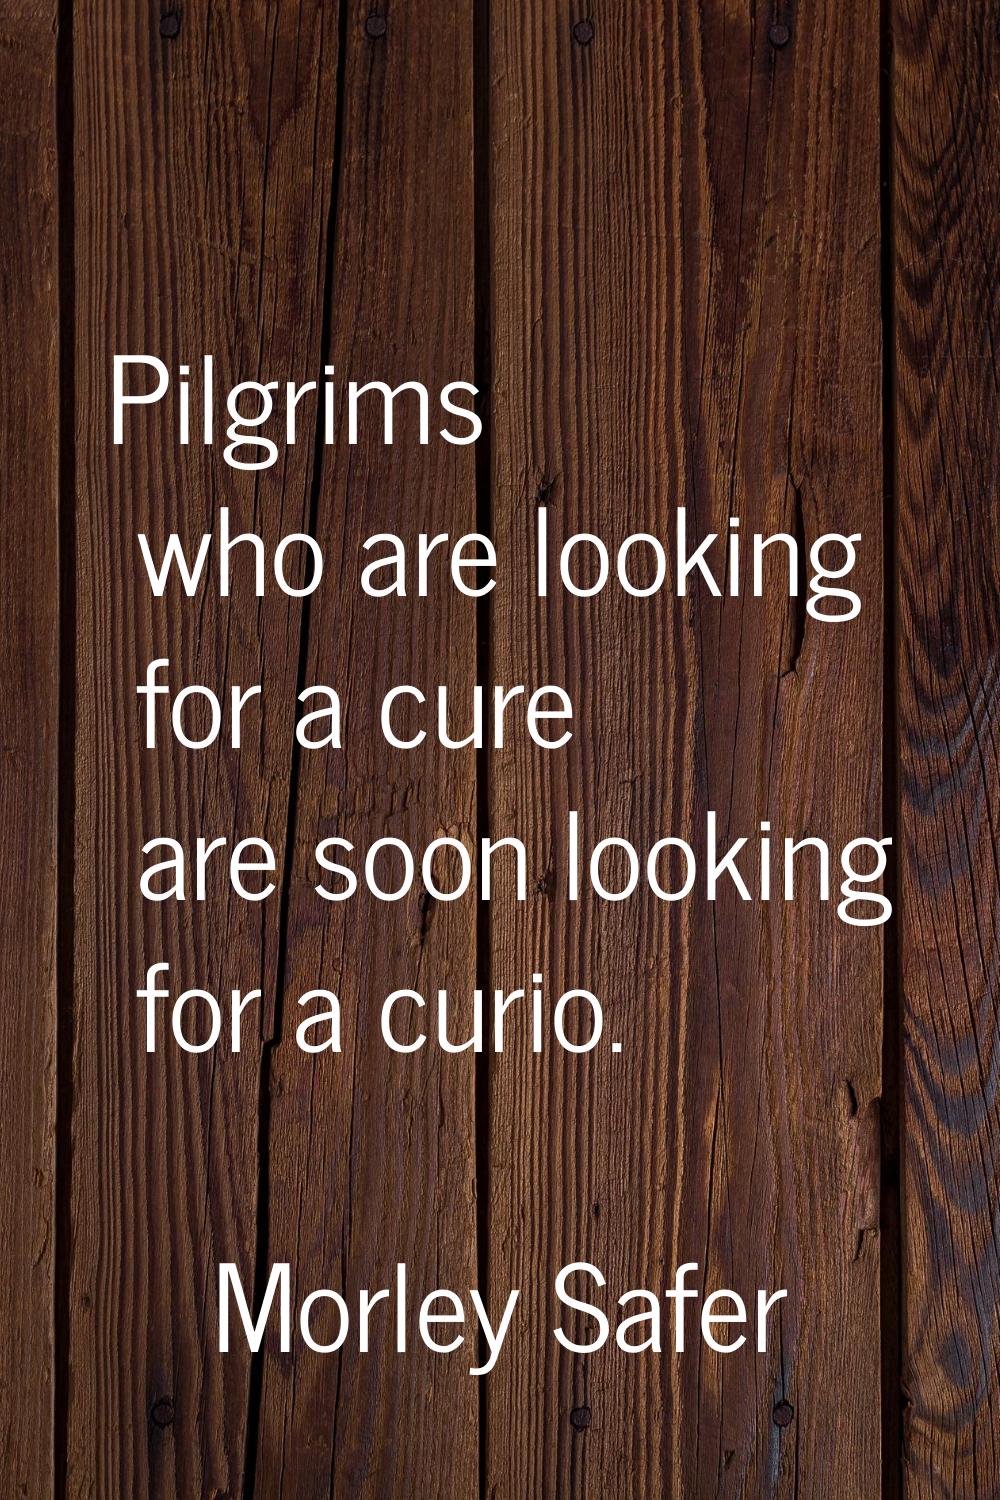 Pilgrims who are looking for a cure are soon looking for a curio.